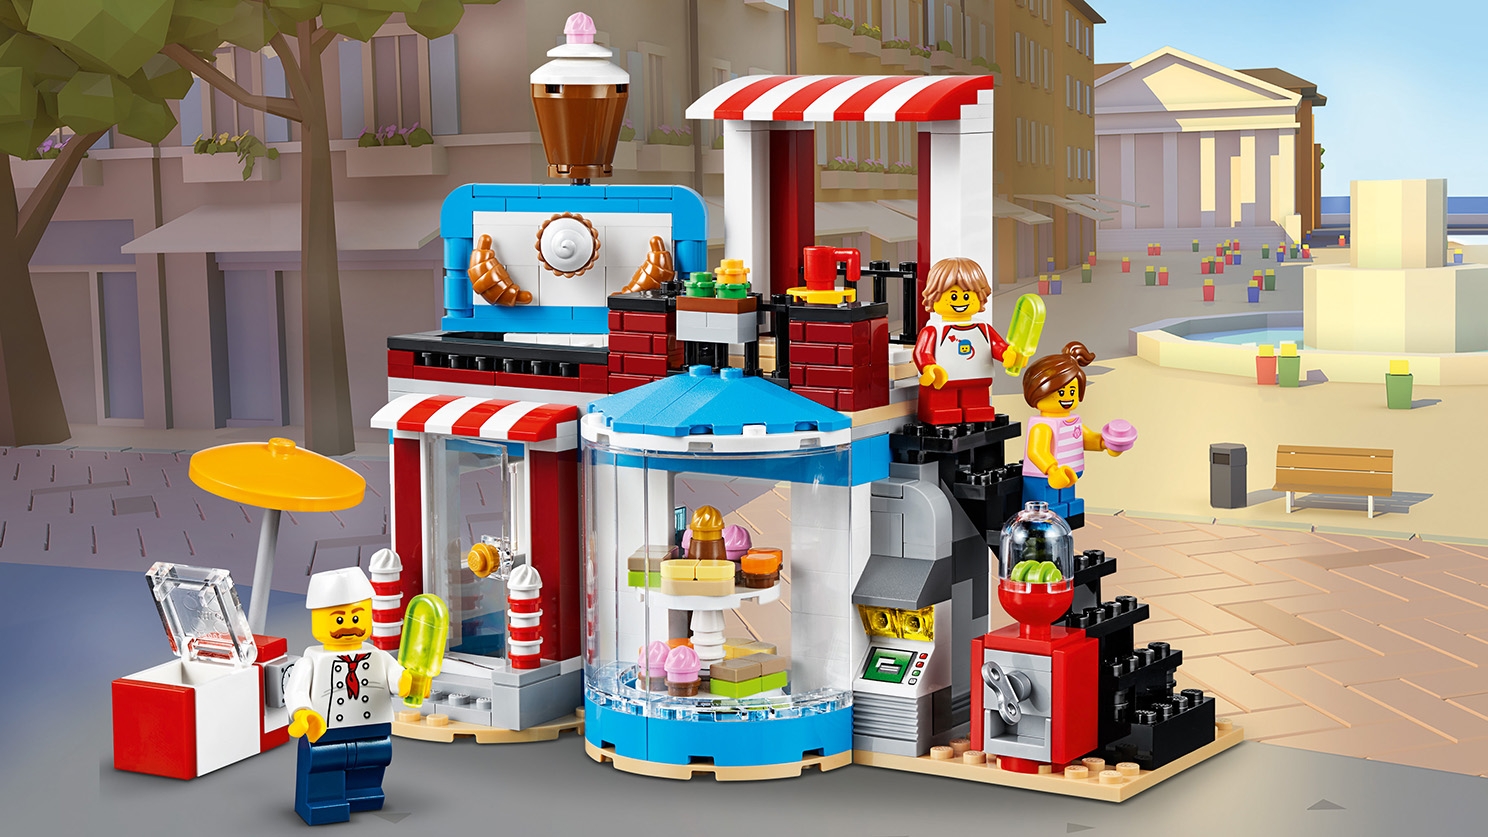 LEGO Creator 3 in 1 - 31077 Modular Sweet Surprises - Build these cute shops that sell all kind of sweets! Ice pops, cupcakes, croissants, bonbons, cookies and coffee.